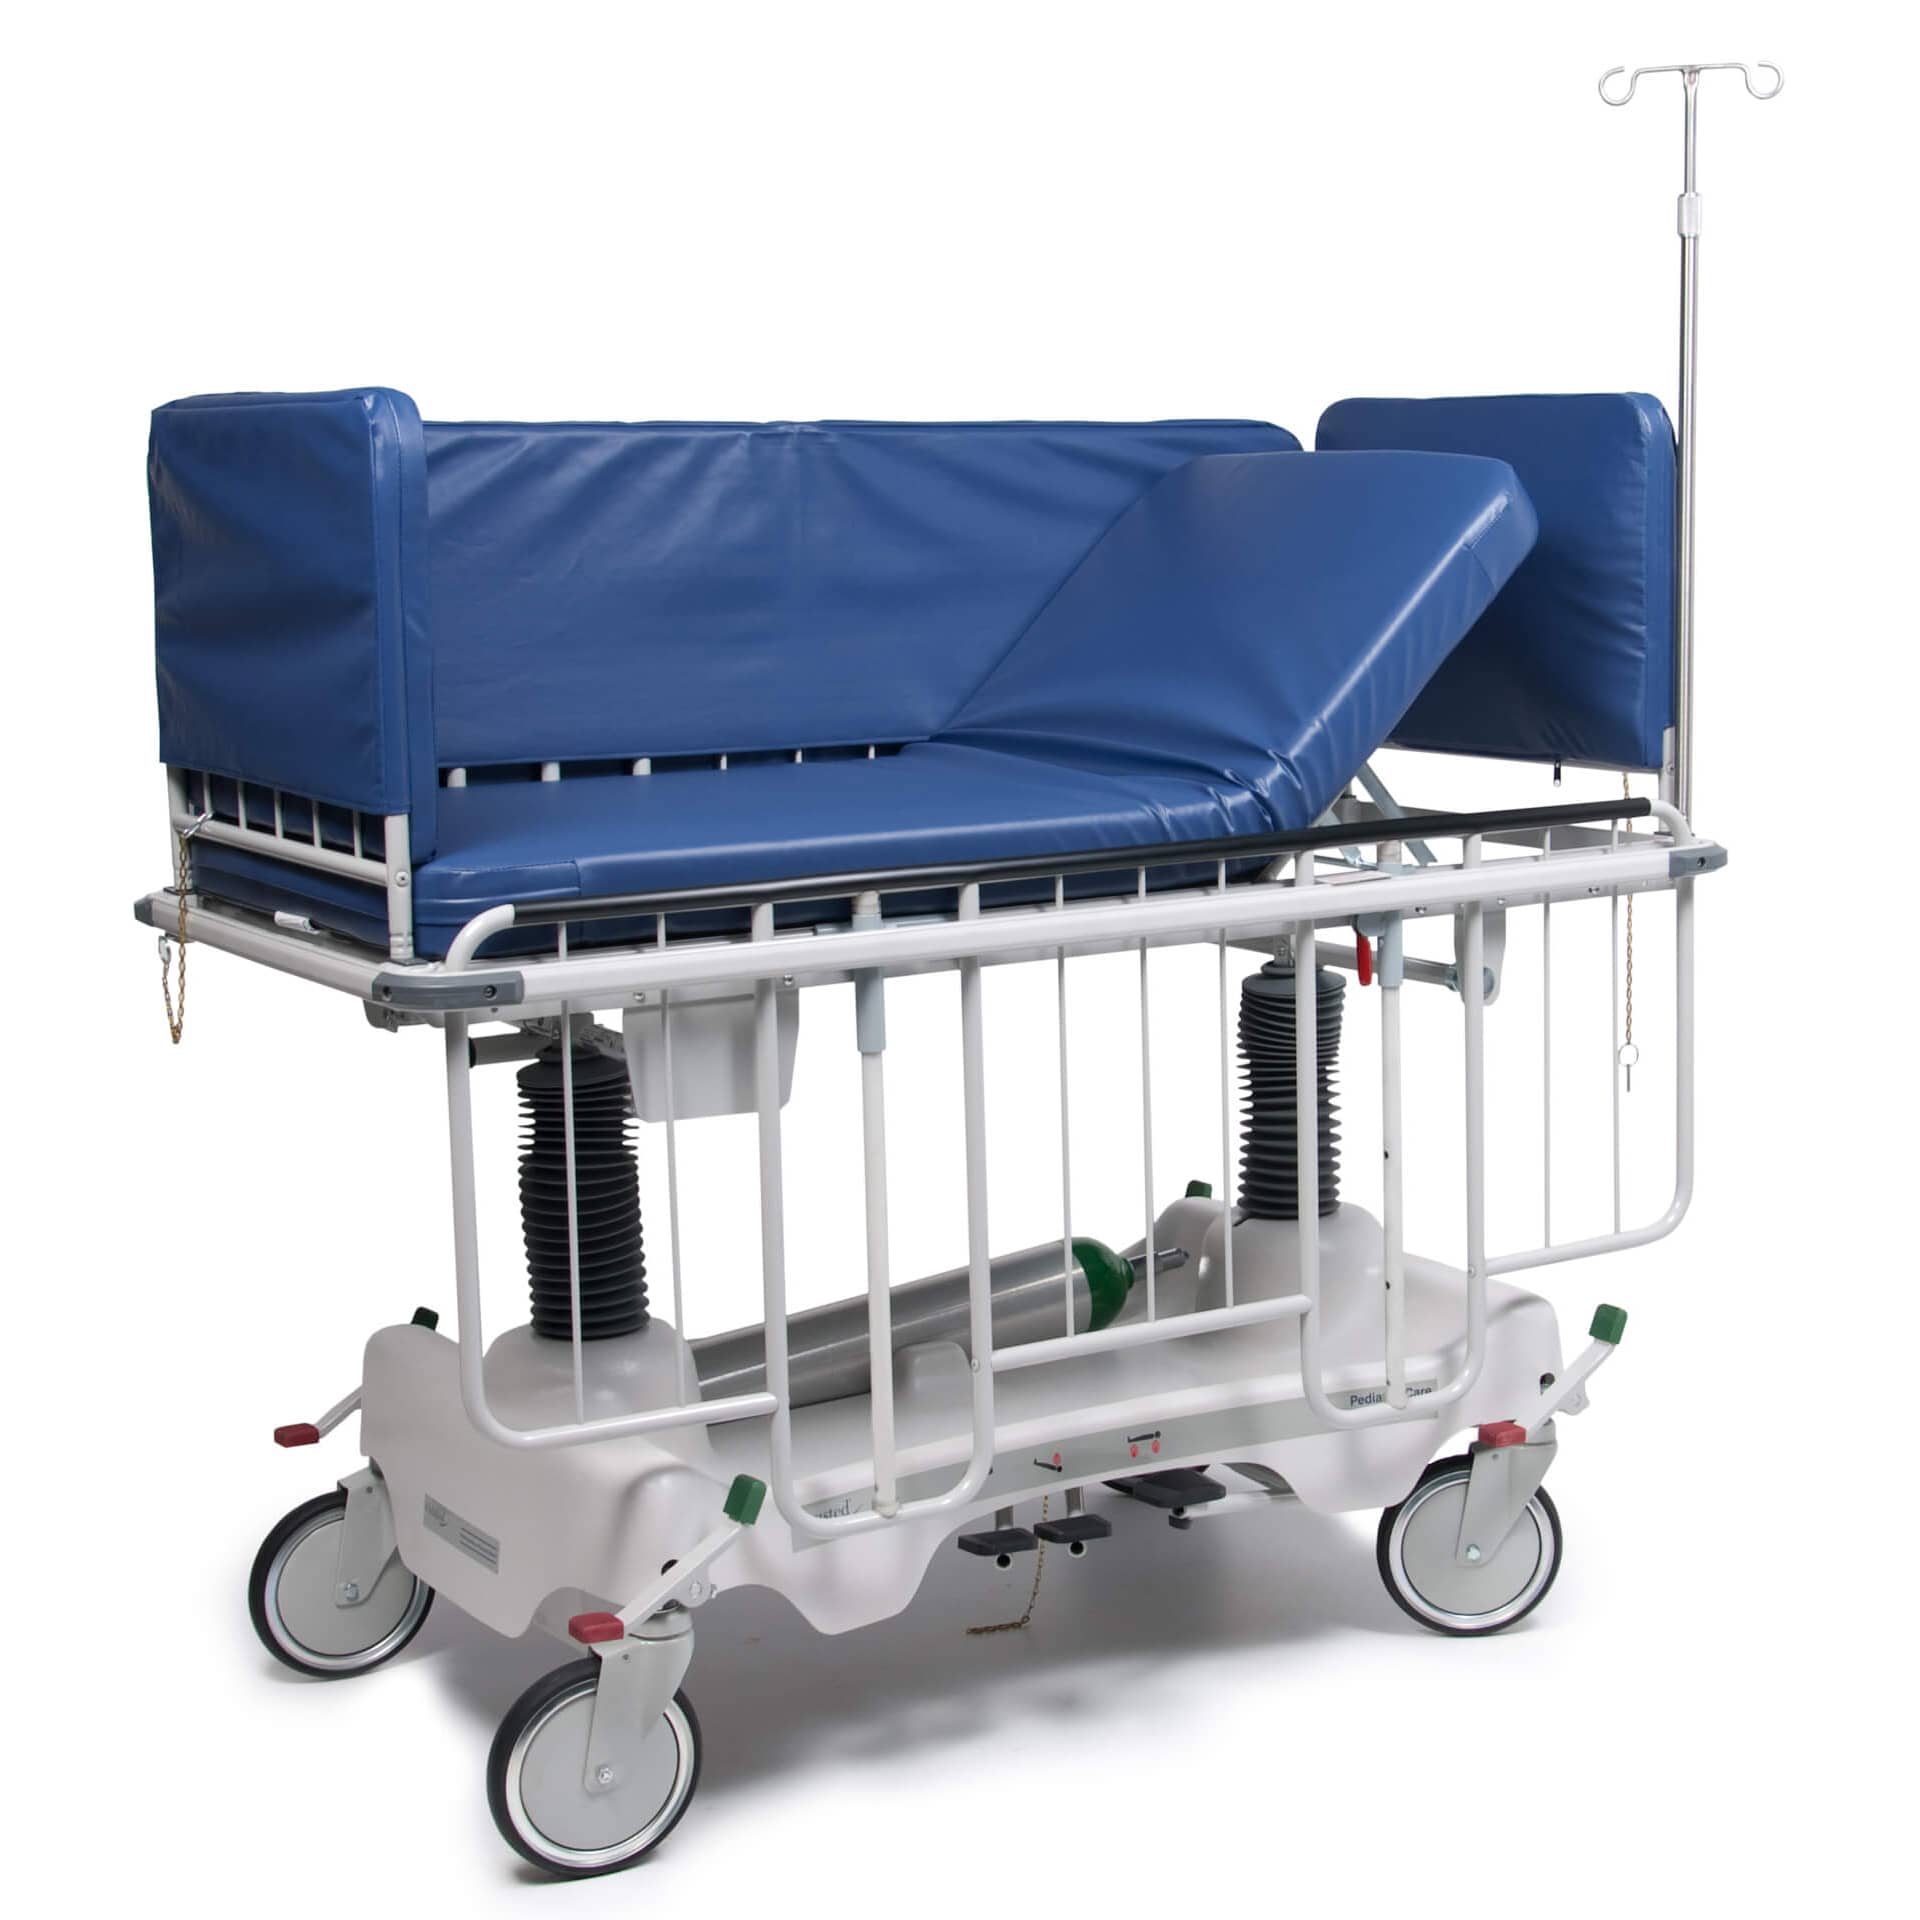 Hausted Pediatric Stretcher Crib Side and End Rail Pads